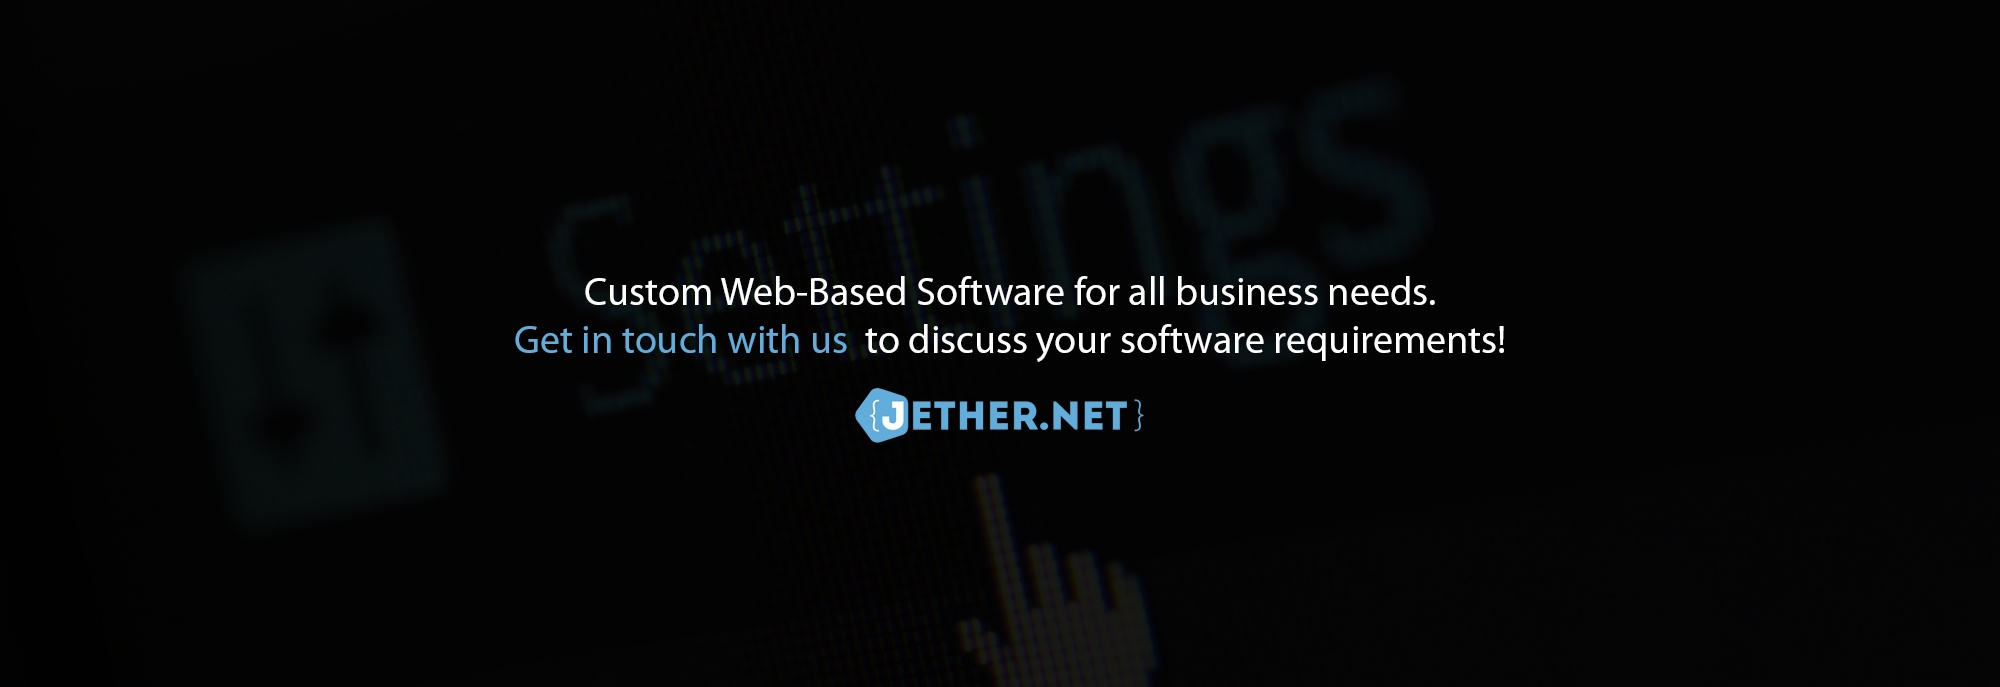 Custom Web-Based Software in Philippines